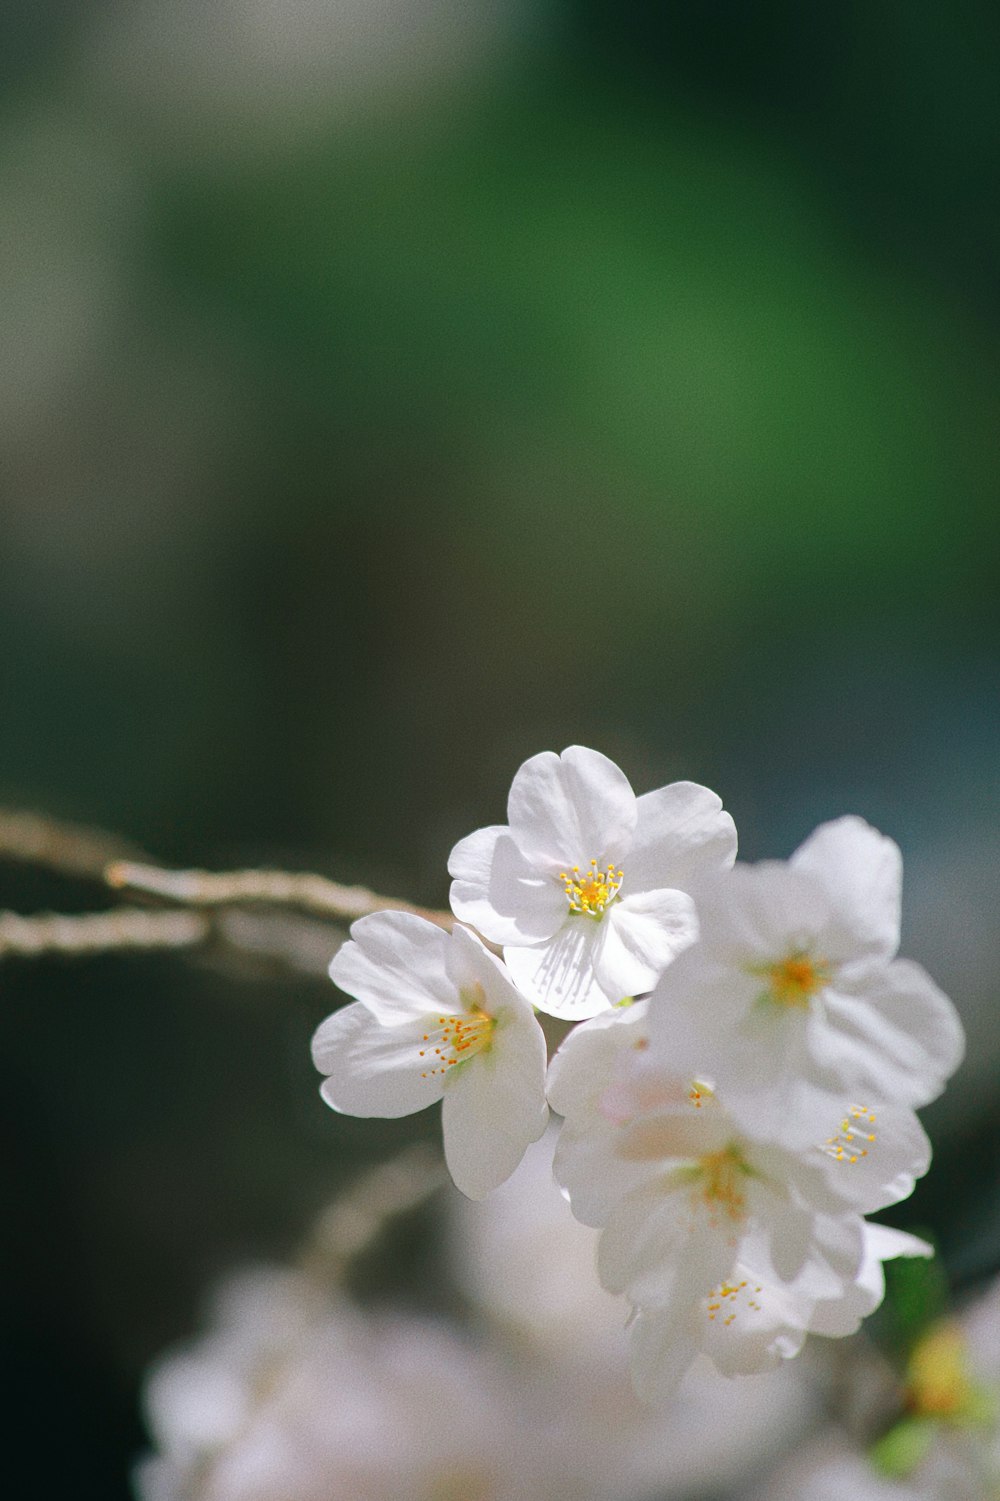 a close up of some white flowers on a branch